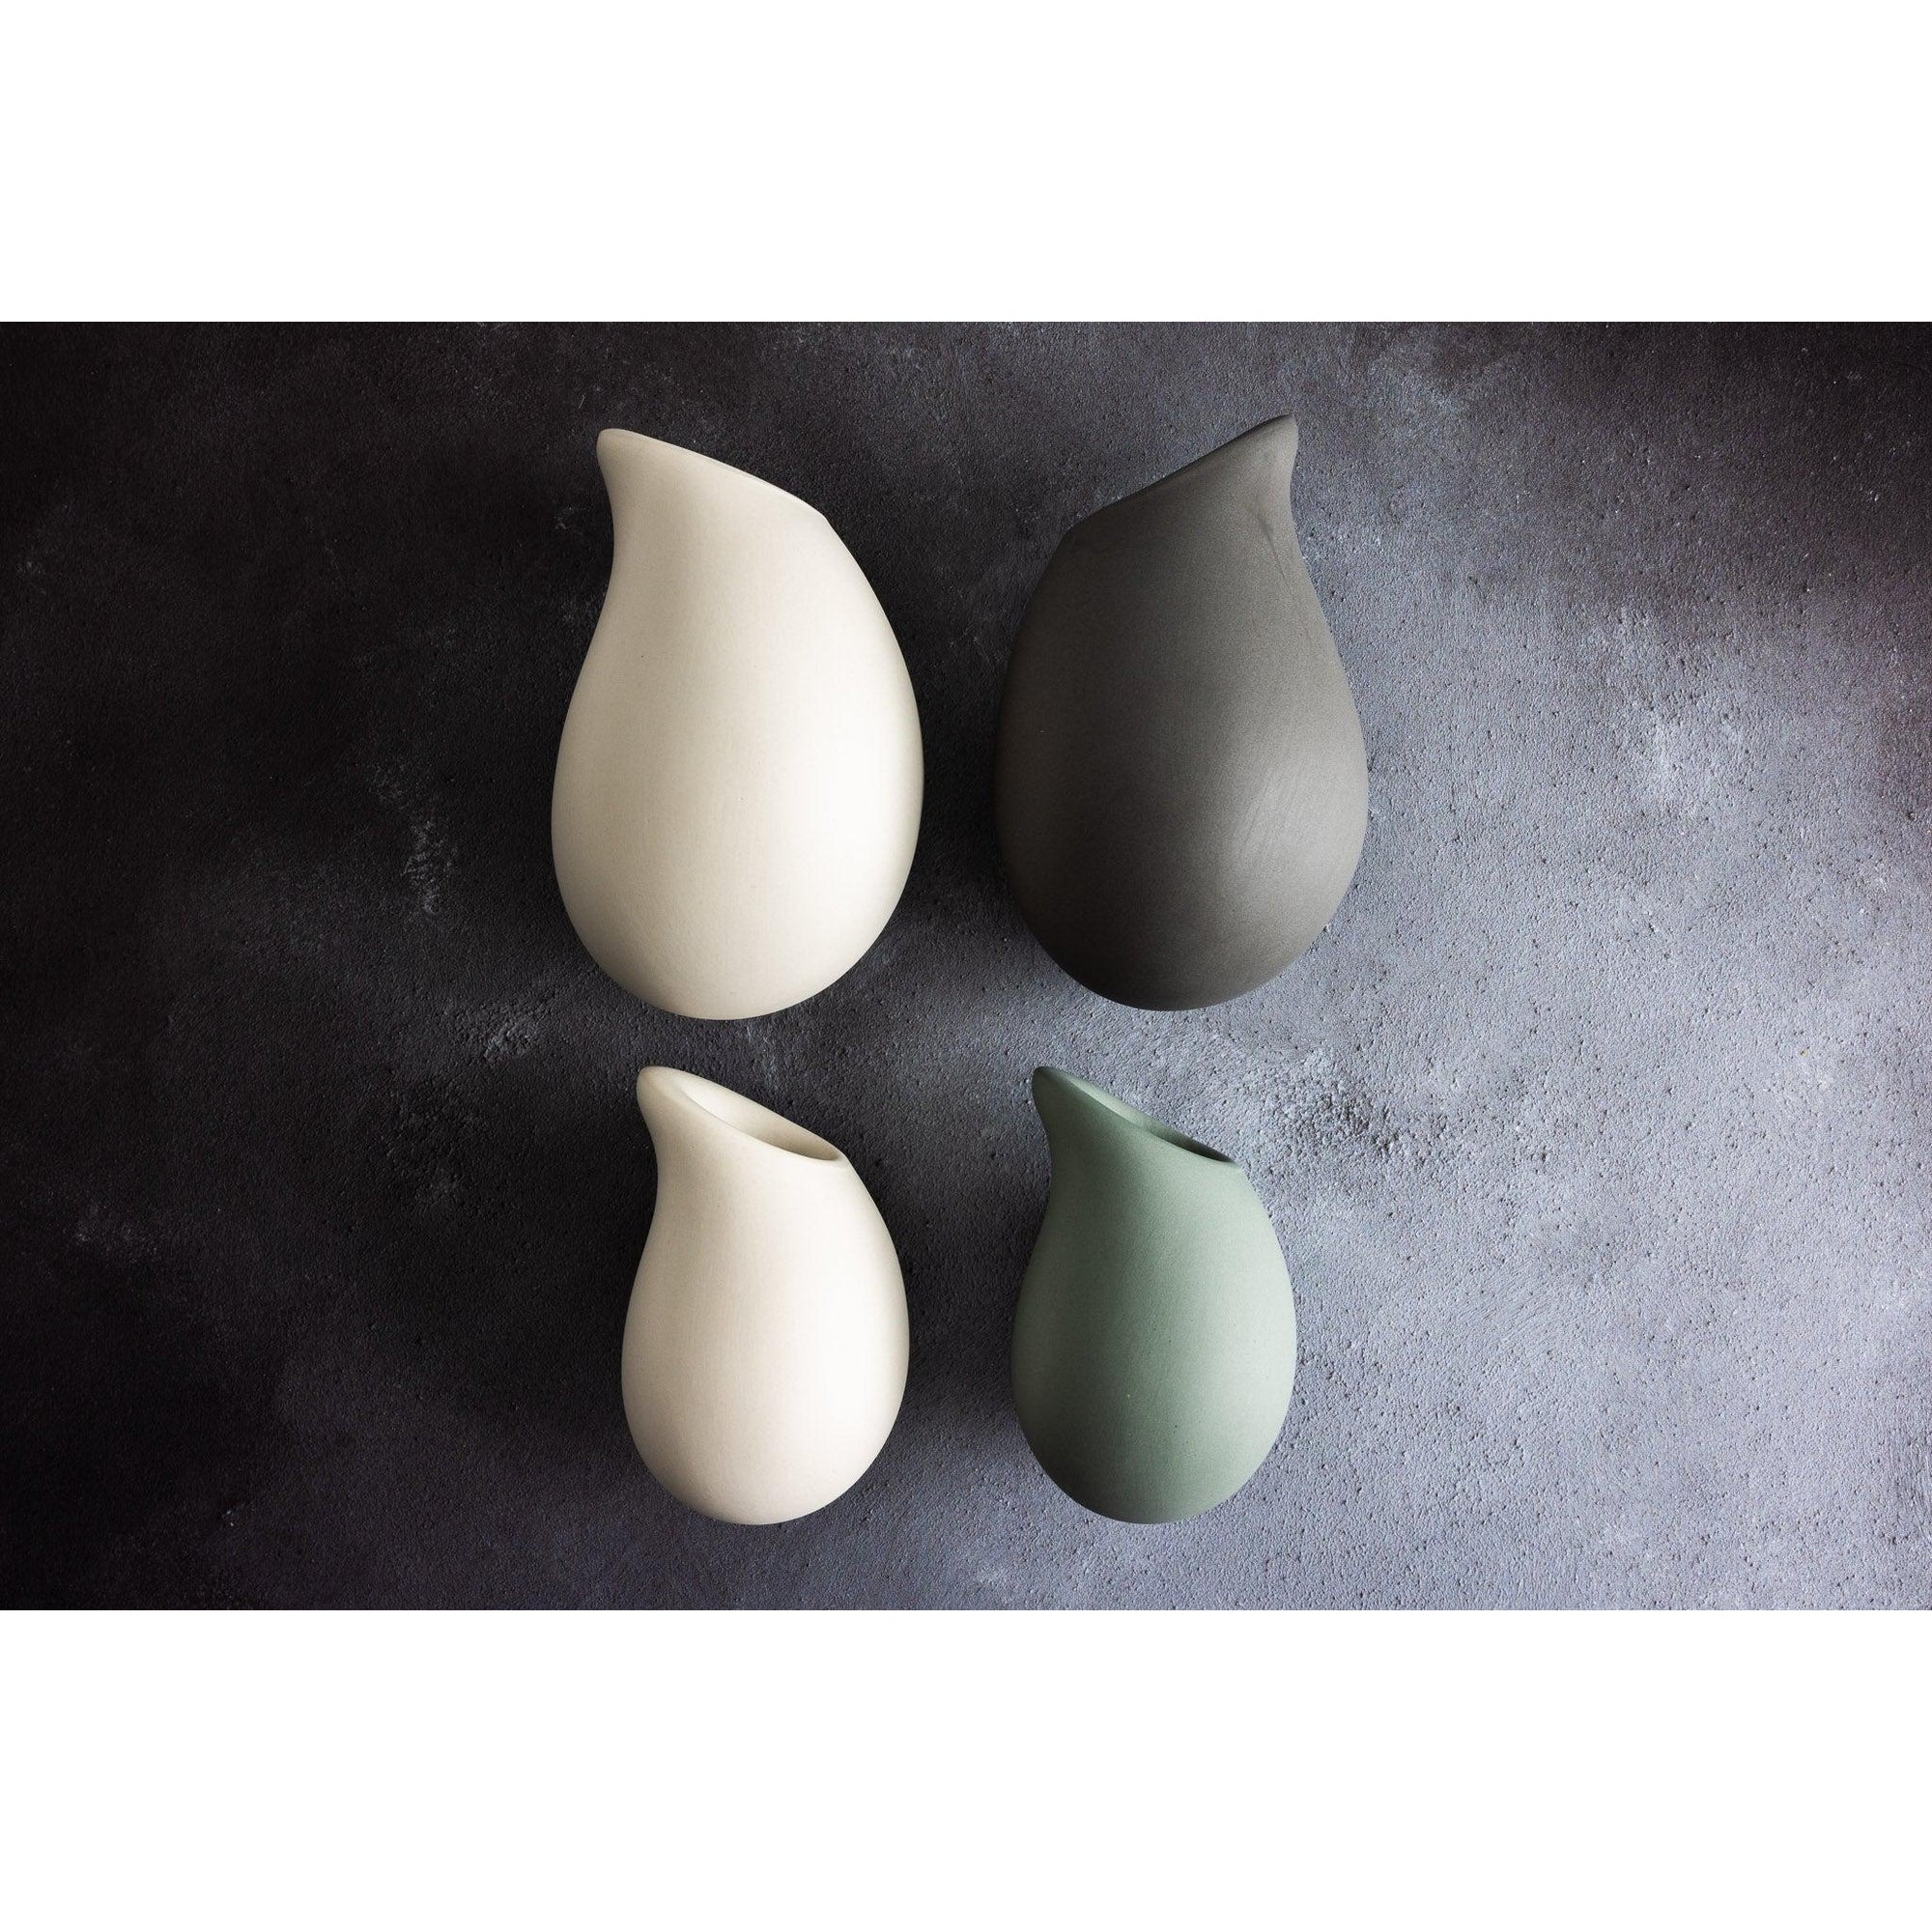 KSQ3 Droplet Wall Vase by Kate Schuricht, available at Padstow Gallery, Cornwall